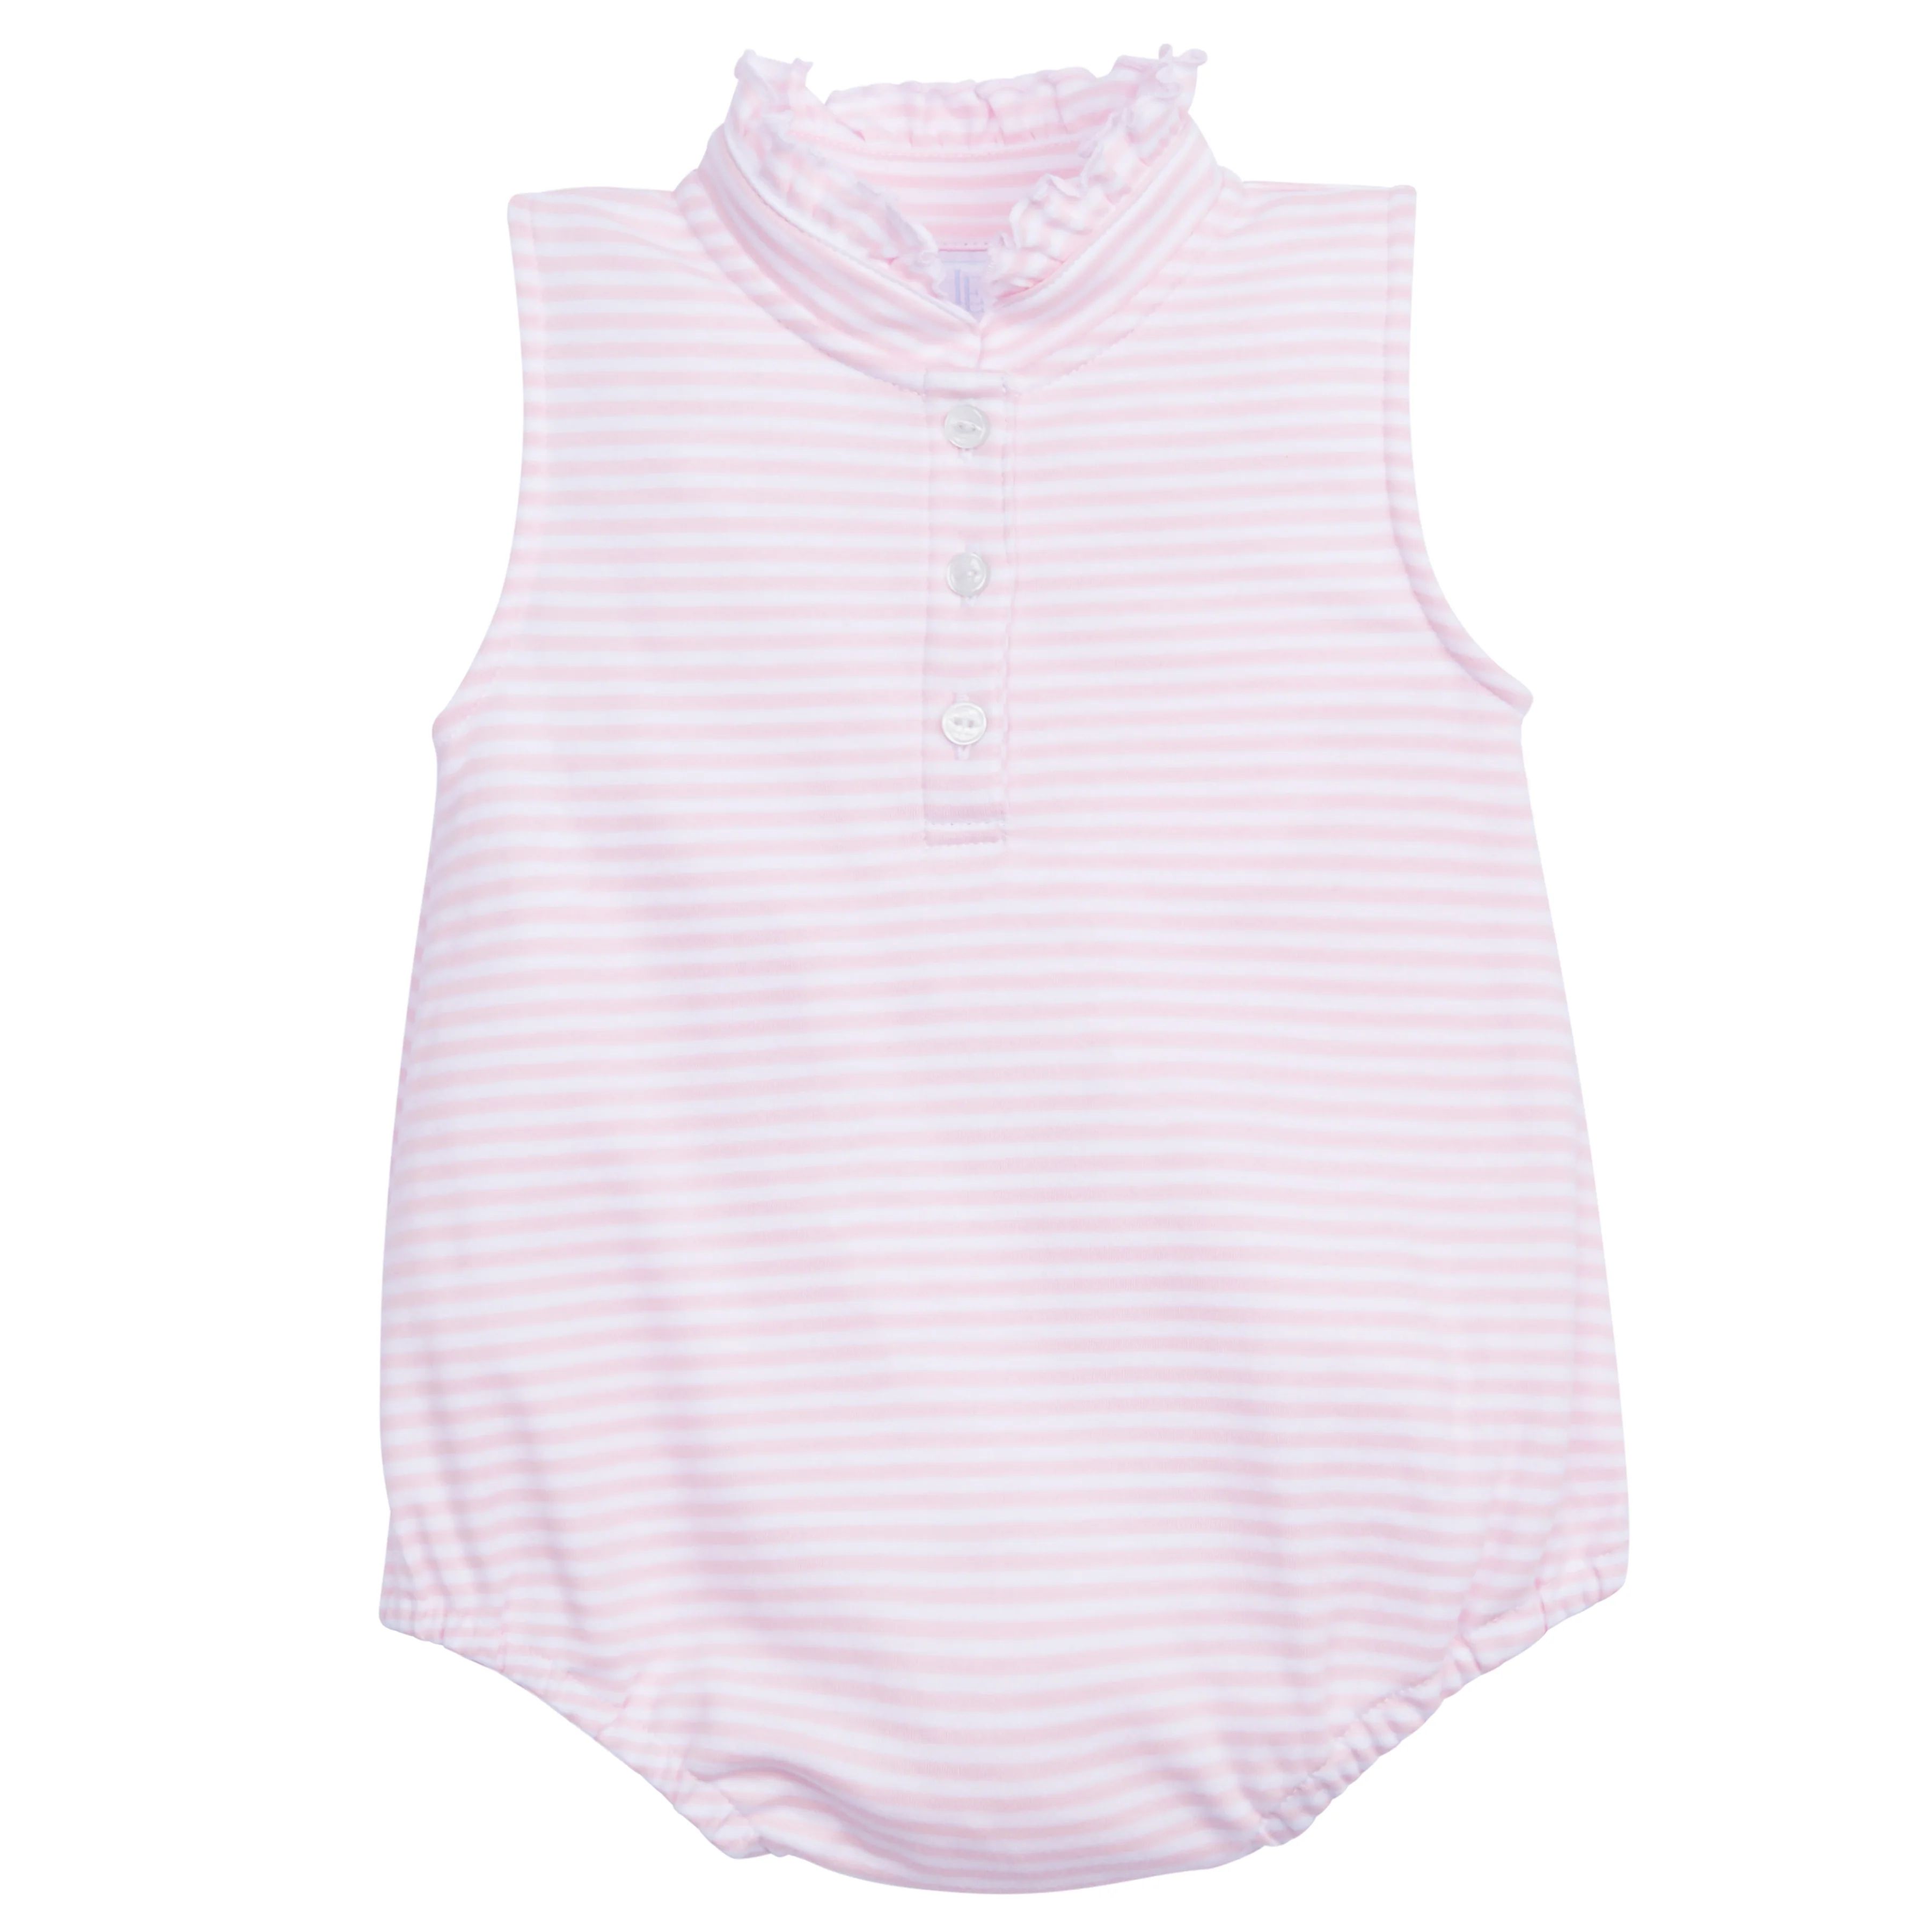 Baby Pink Bubble Outfit - Girls Sleeveless Romper | Little English